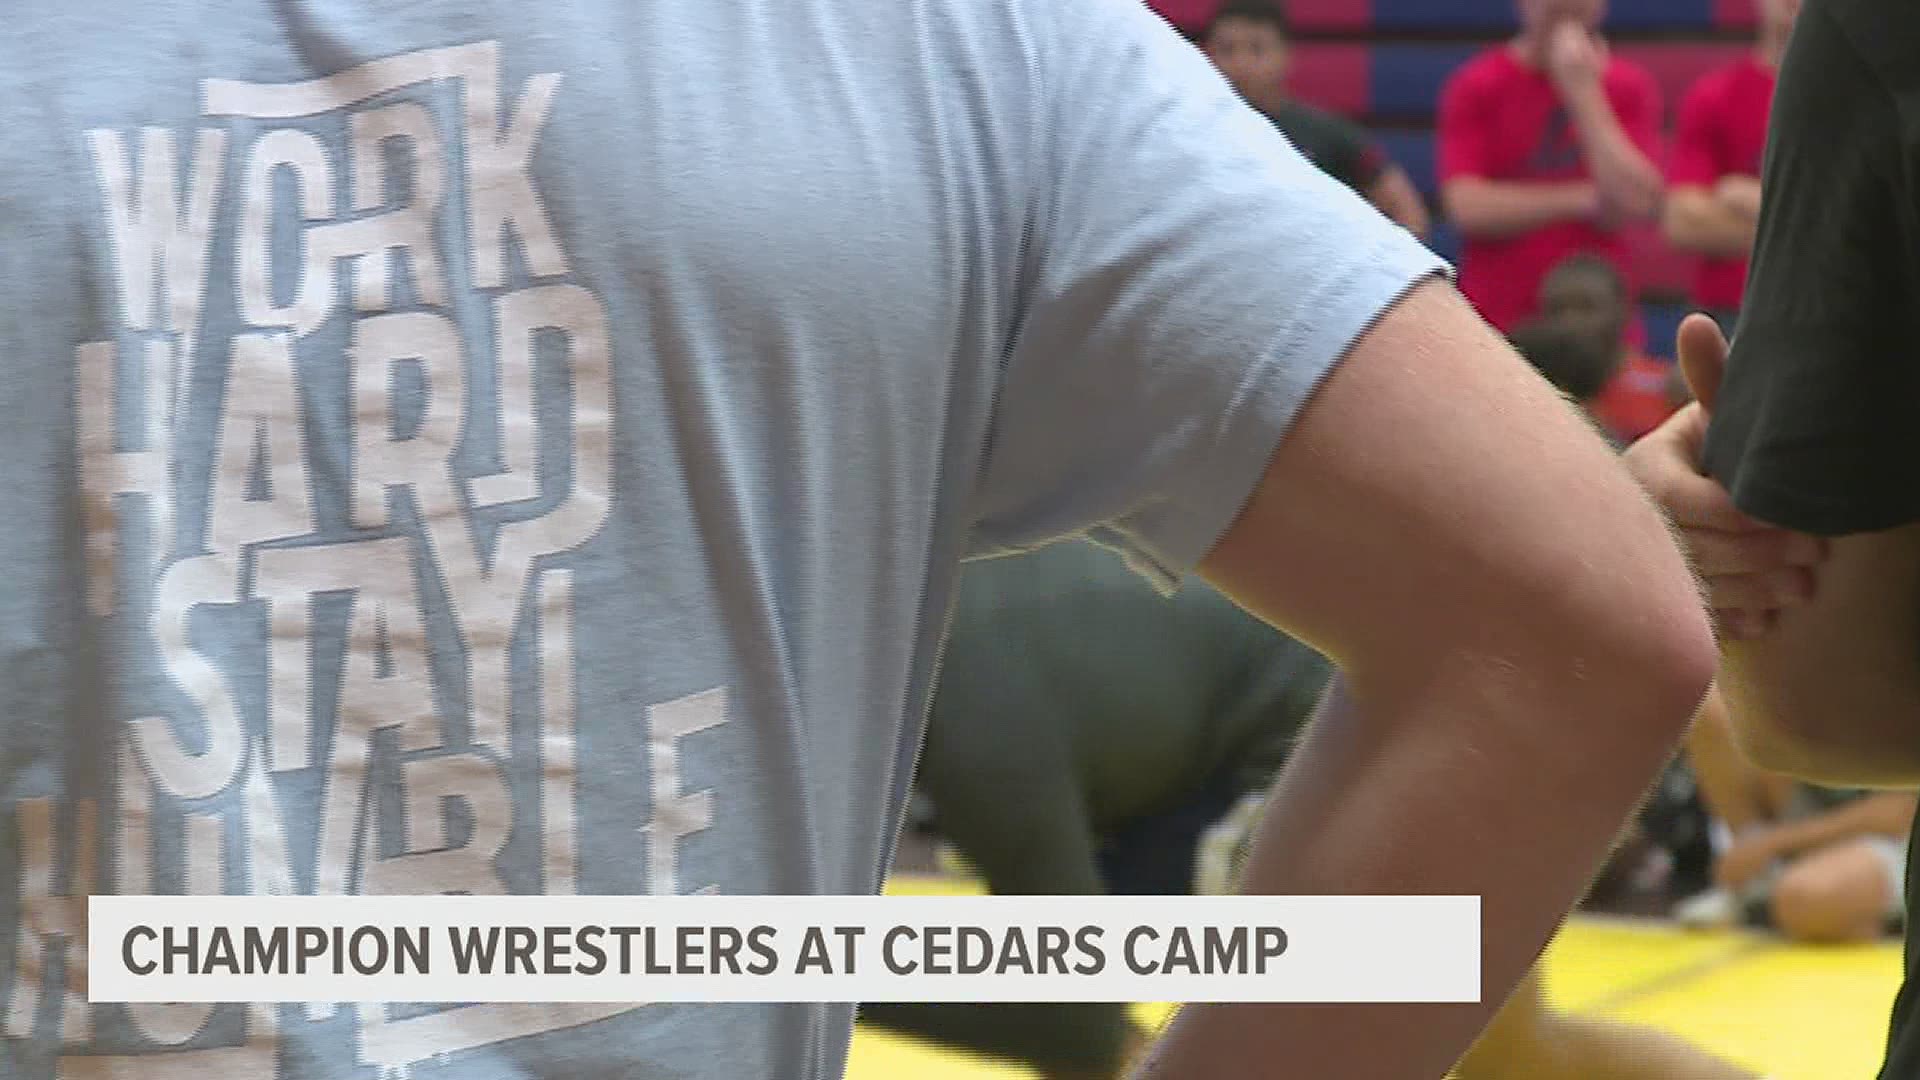 Penn State wrestler Aaron Brooks among three current national champions to instruct at Lebanon Cedars camp